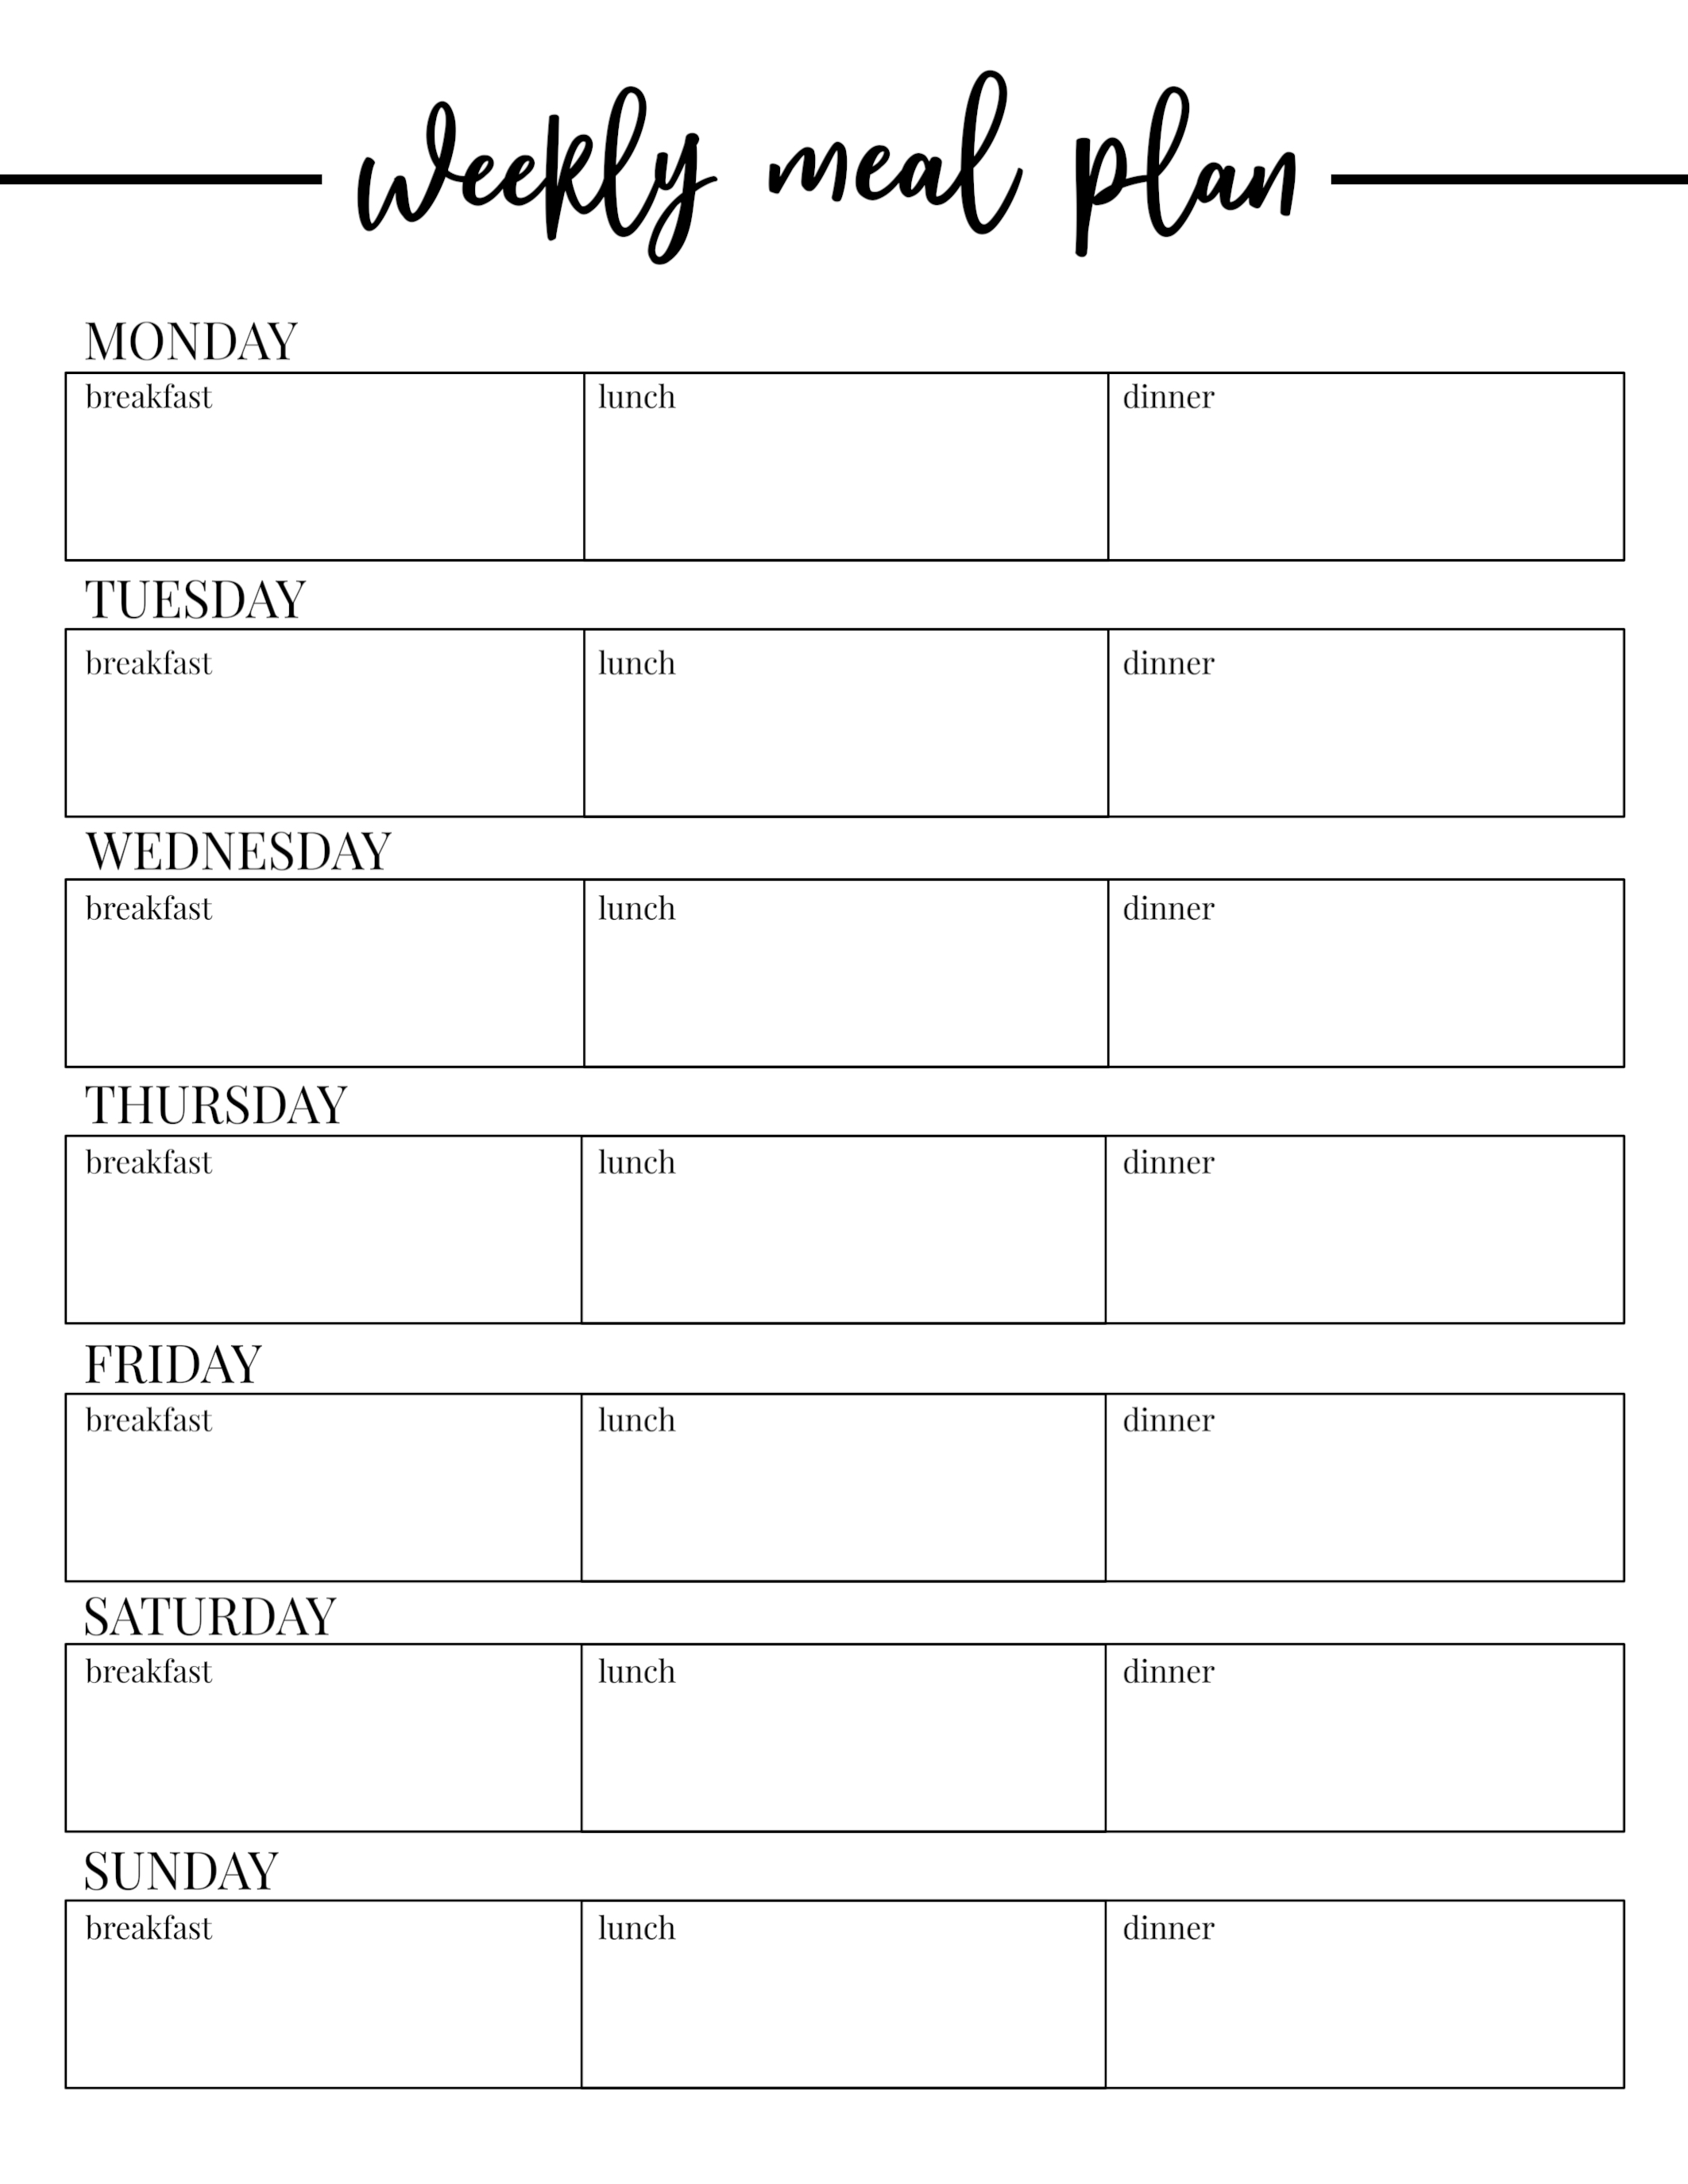 meal planning monthly calendar template